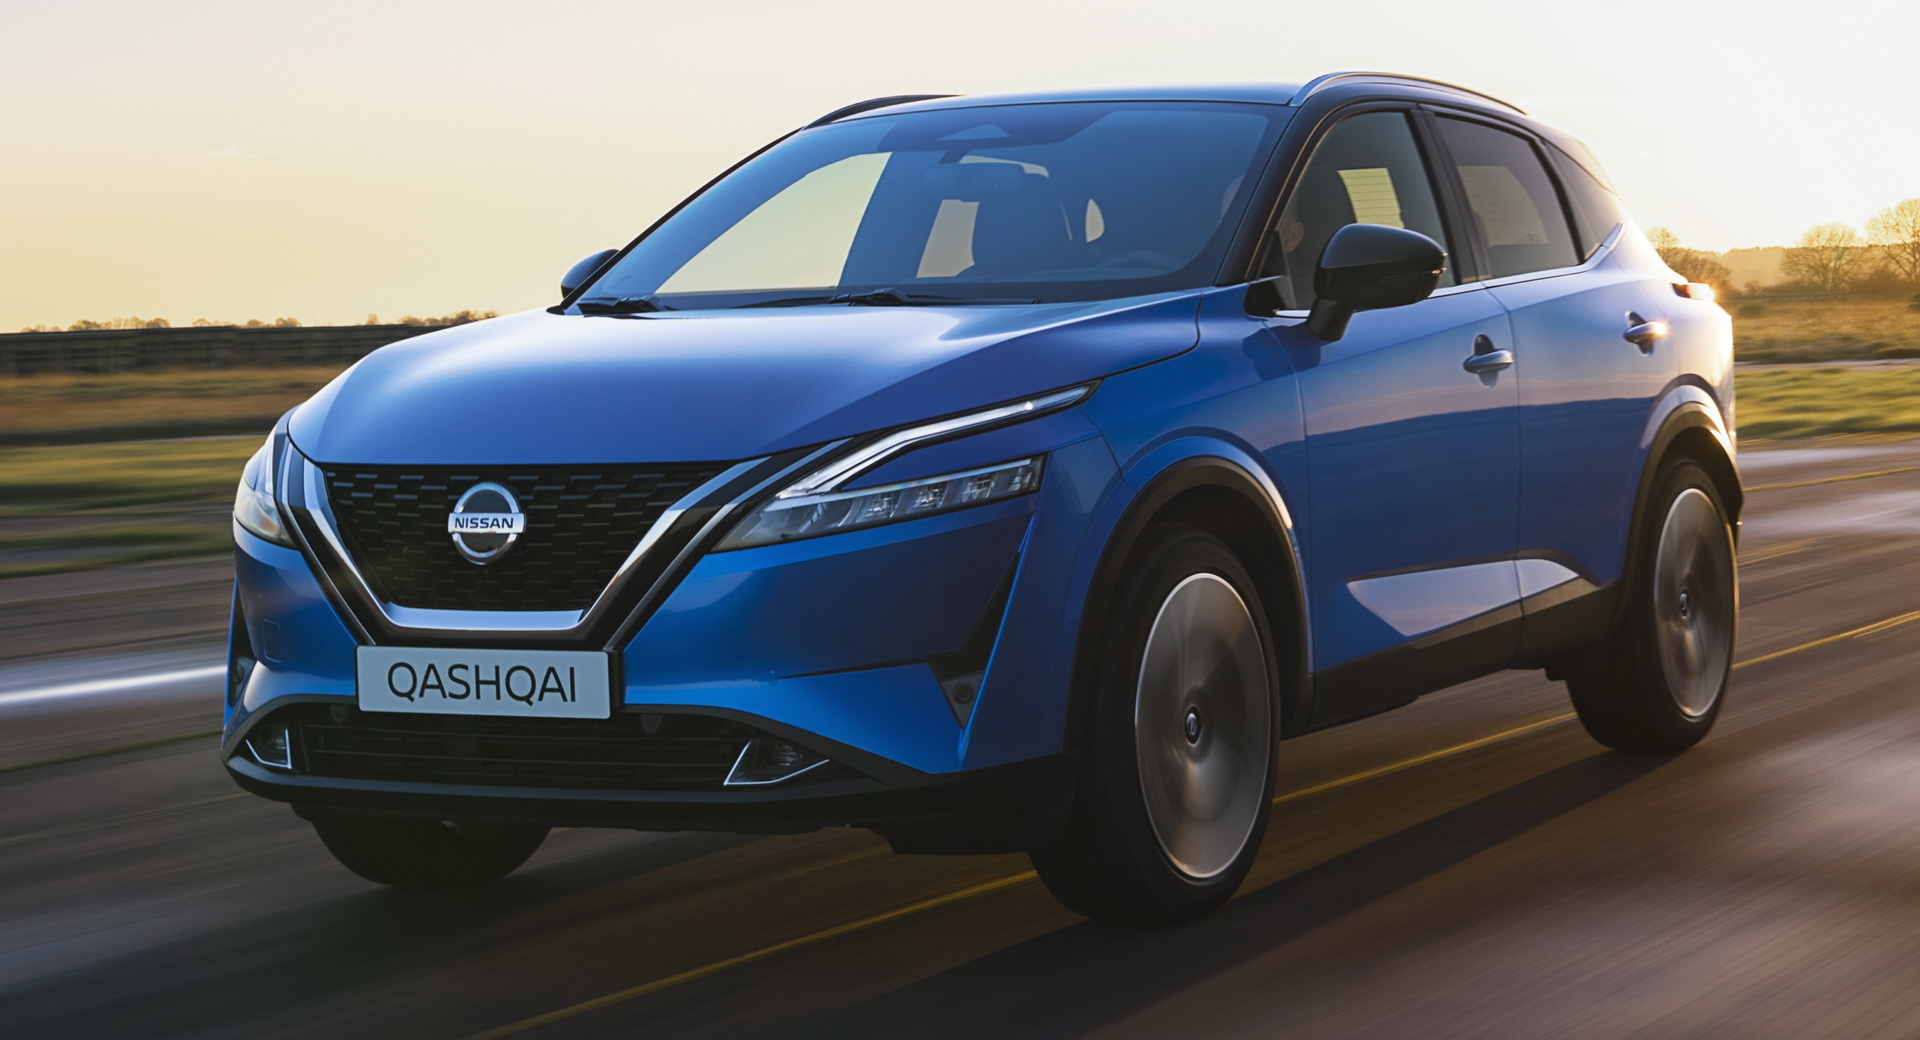 Nissan Bringing Its e-POWER Technology To Australia, Likely With The Qashqai - CarScoops